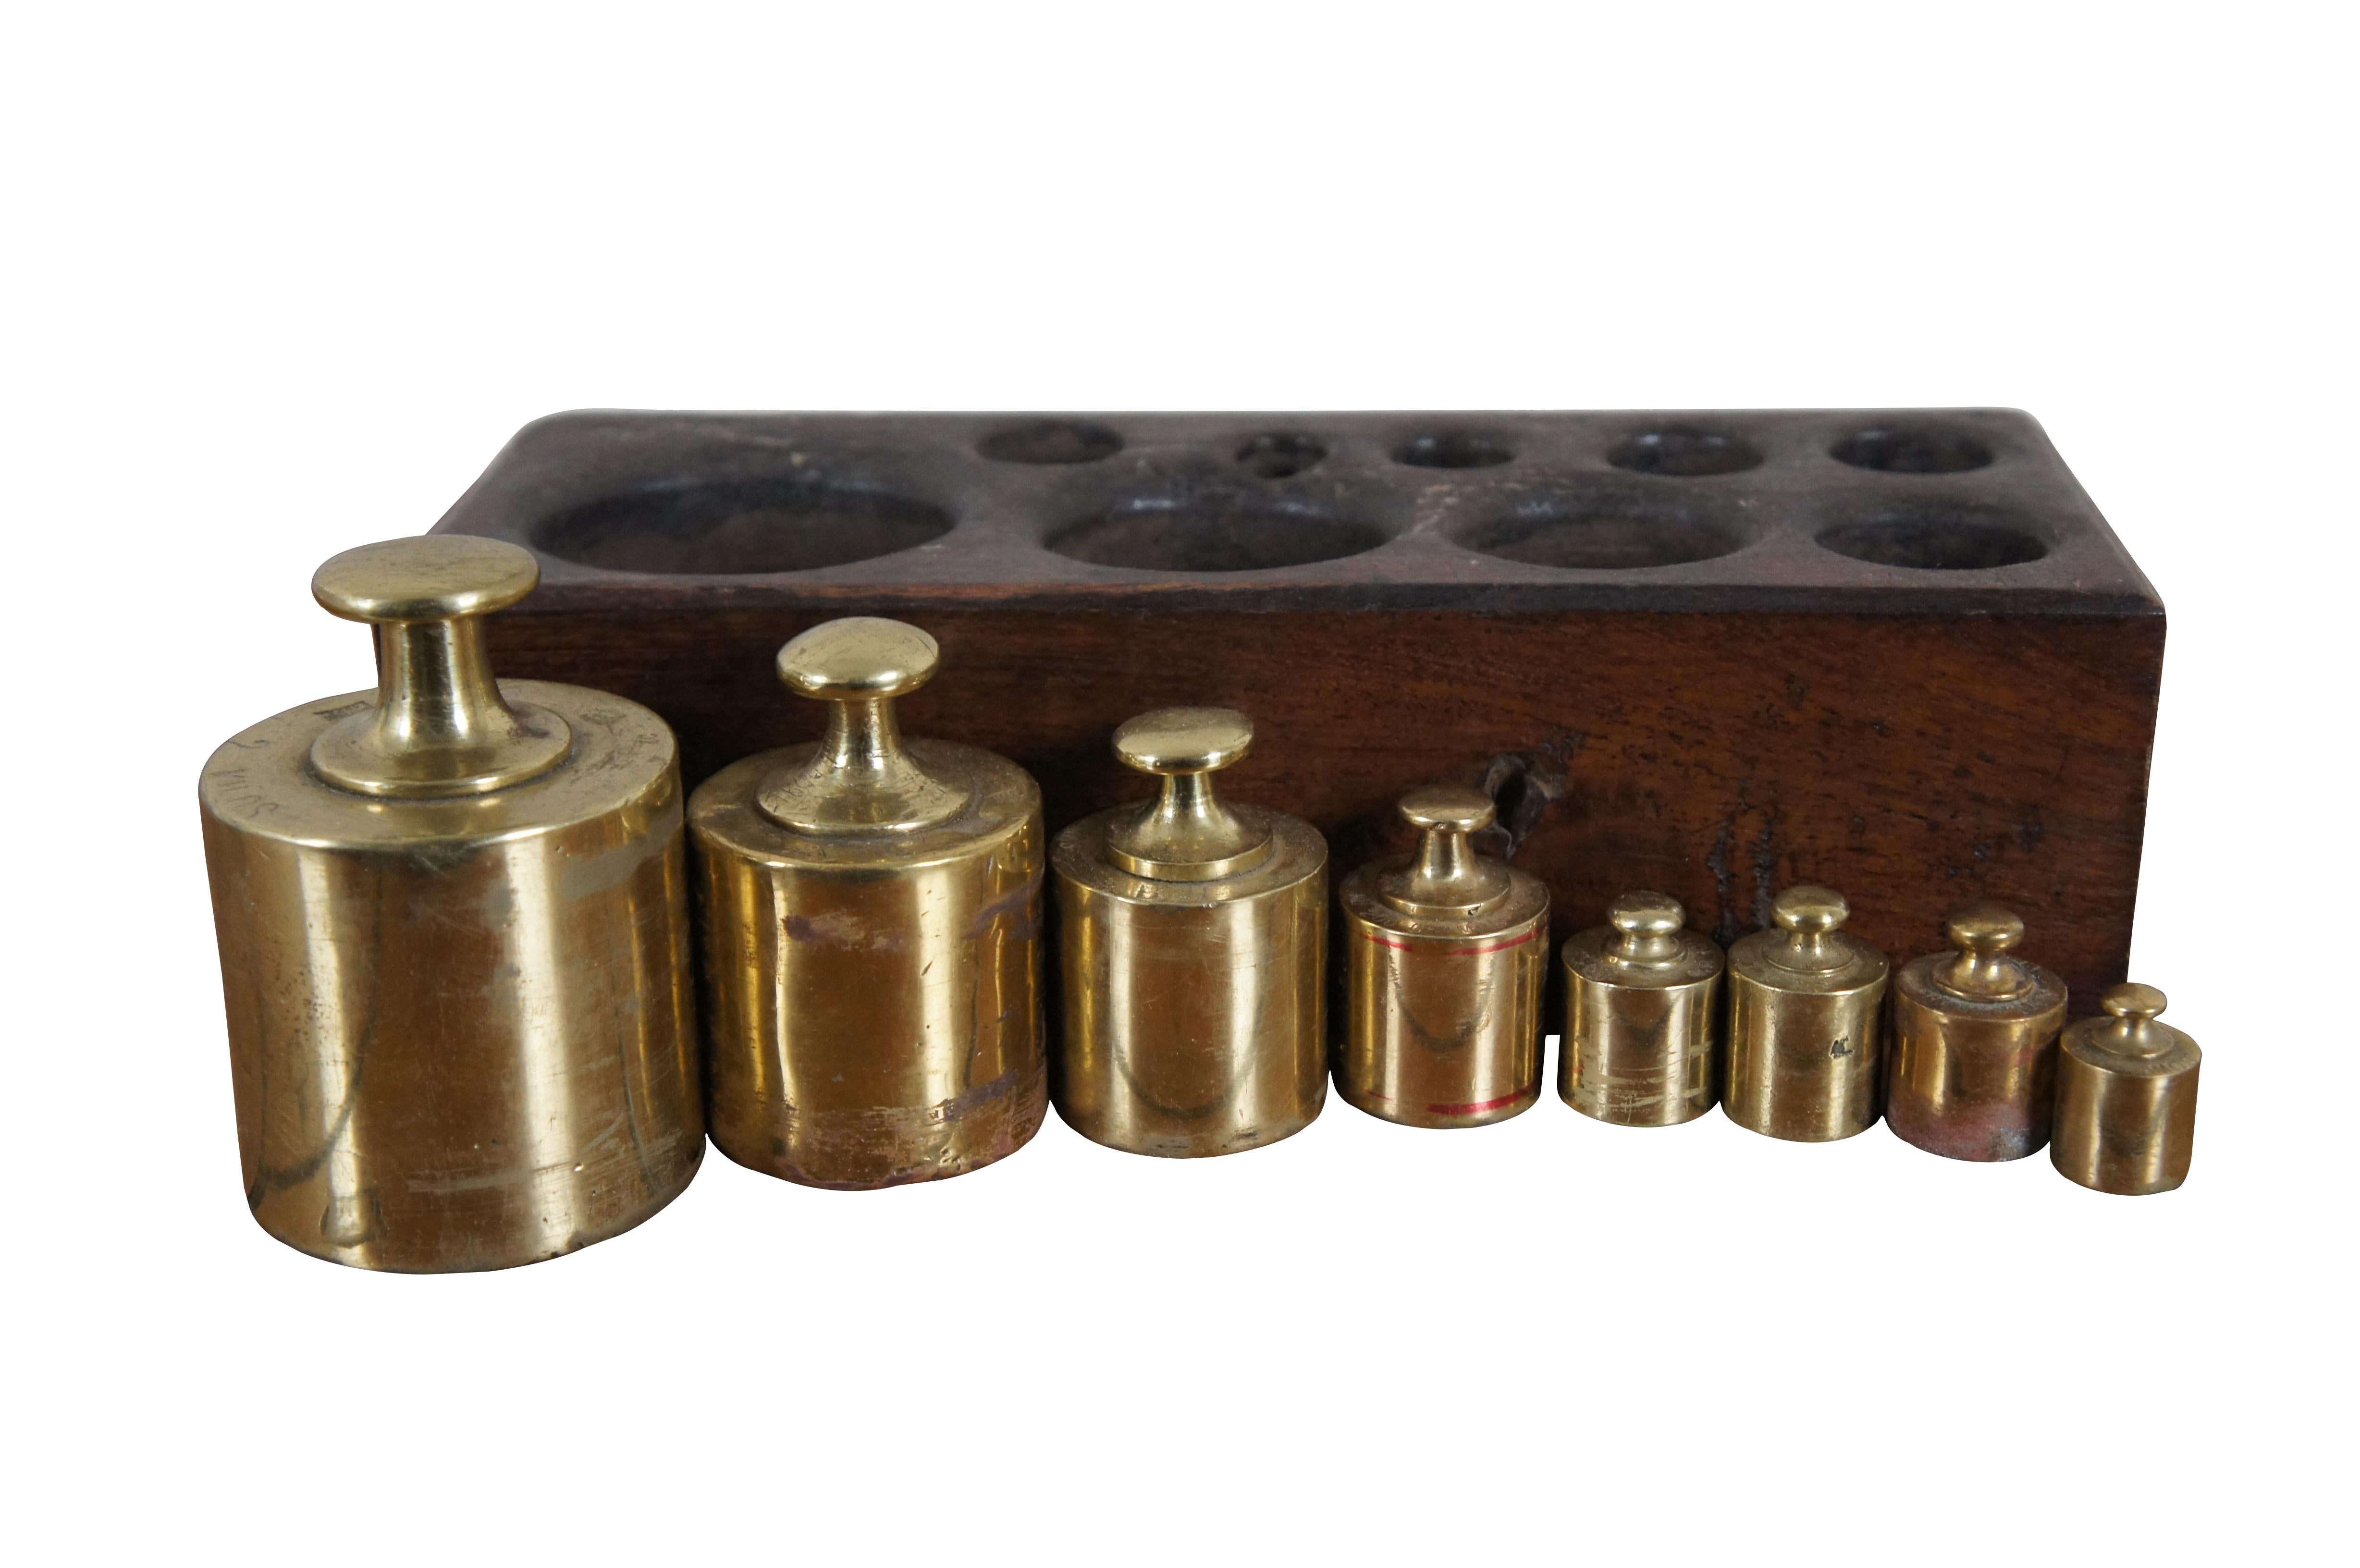 1920's brass apothecary scale weight set including nine weights (one 50 gram, three 100 grams, one 200 grams, one 500 grams, one 1 kilo, and one 2 kilos) set in a wooden block. Block contains an empty slot for what would presumably be a 25 gram